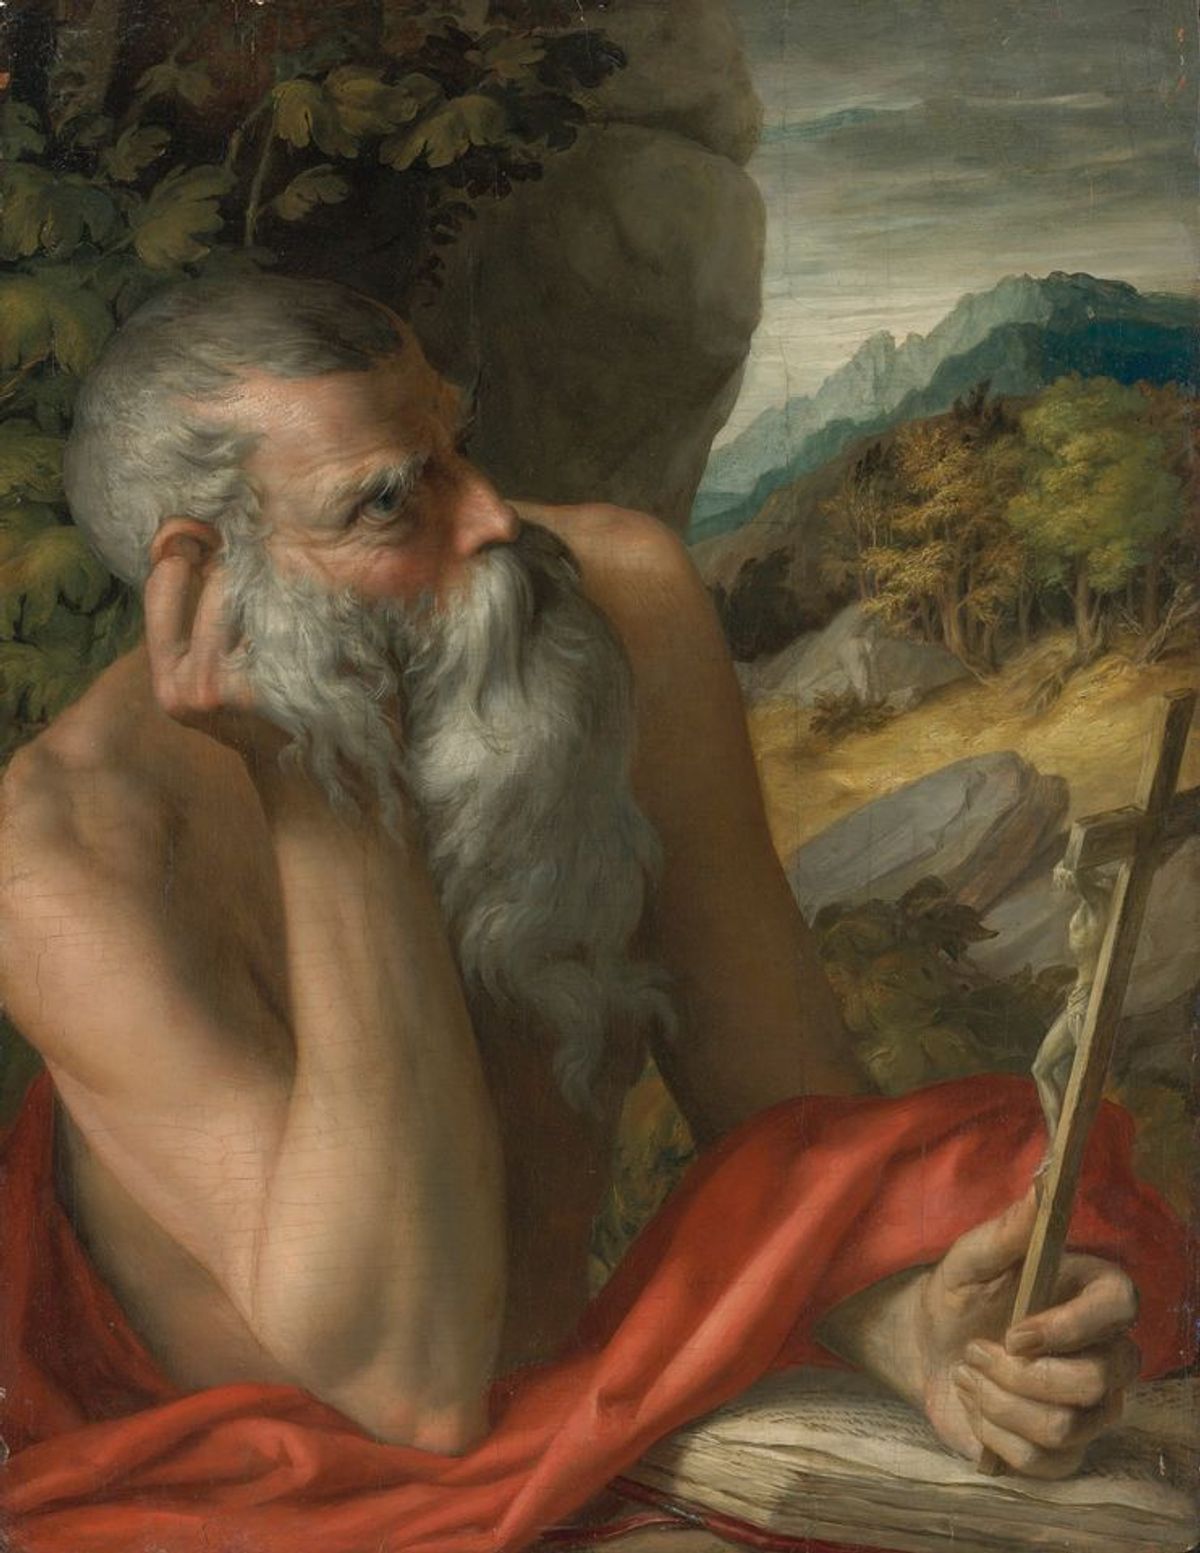 Two separate investigations found that Saint Jerome, attributed to Parmigianino, is a modern fake Courtesy of Sotheby's